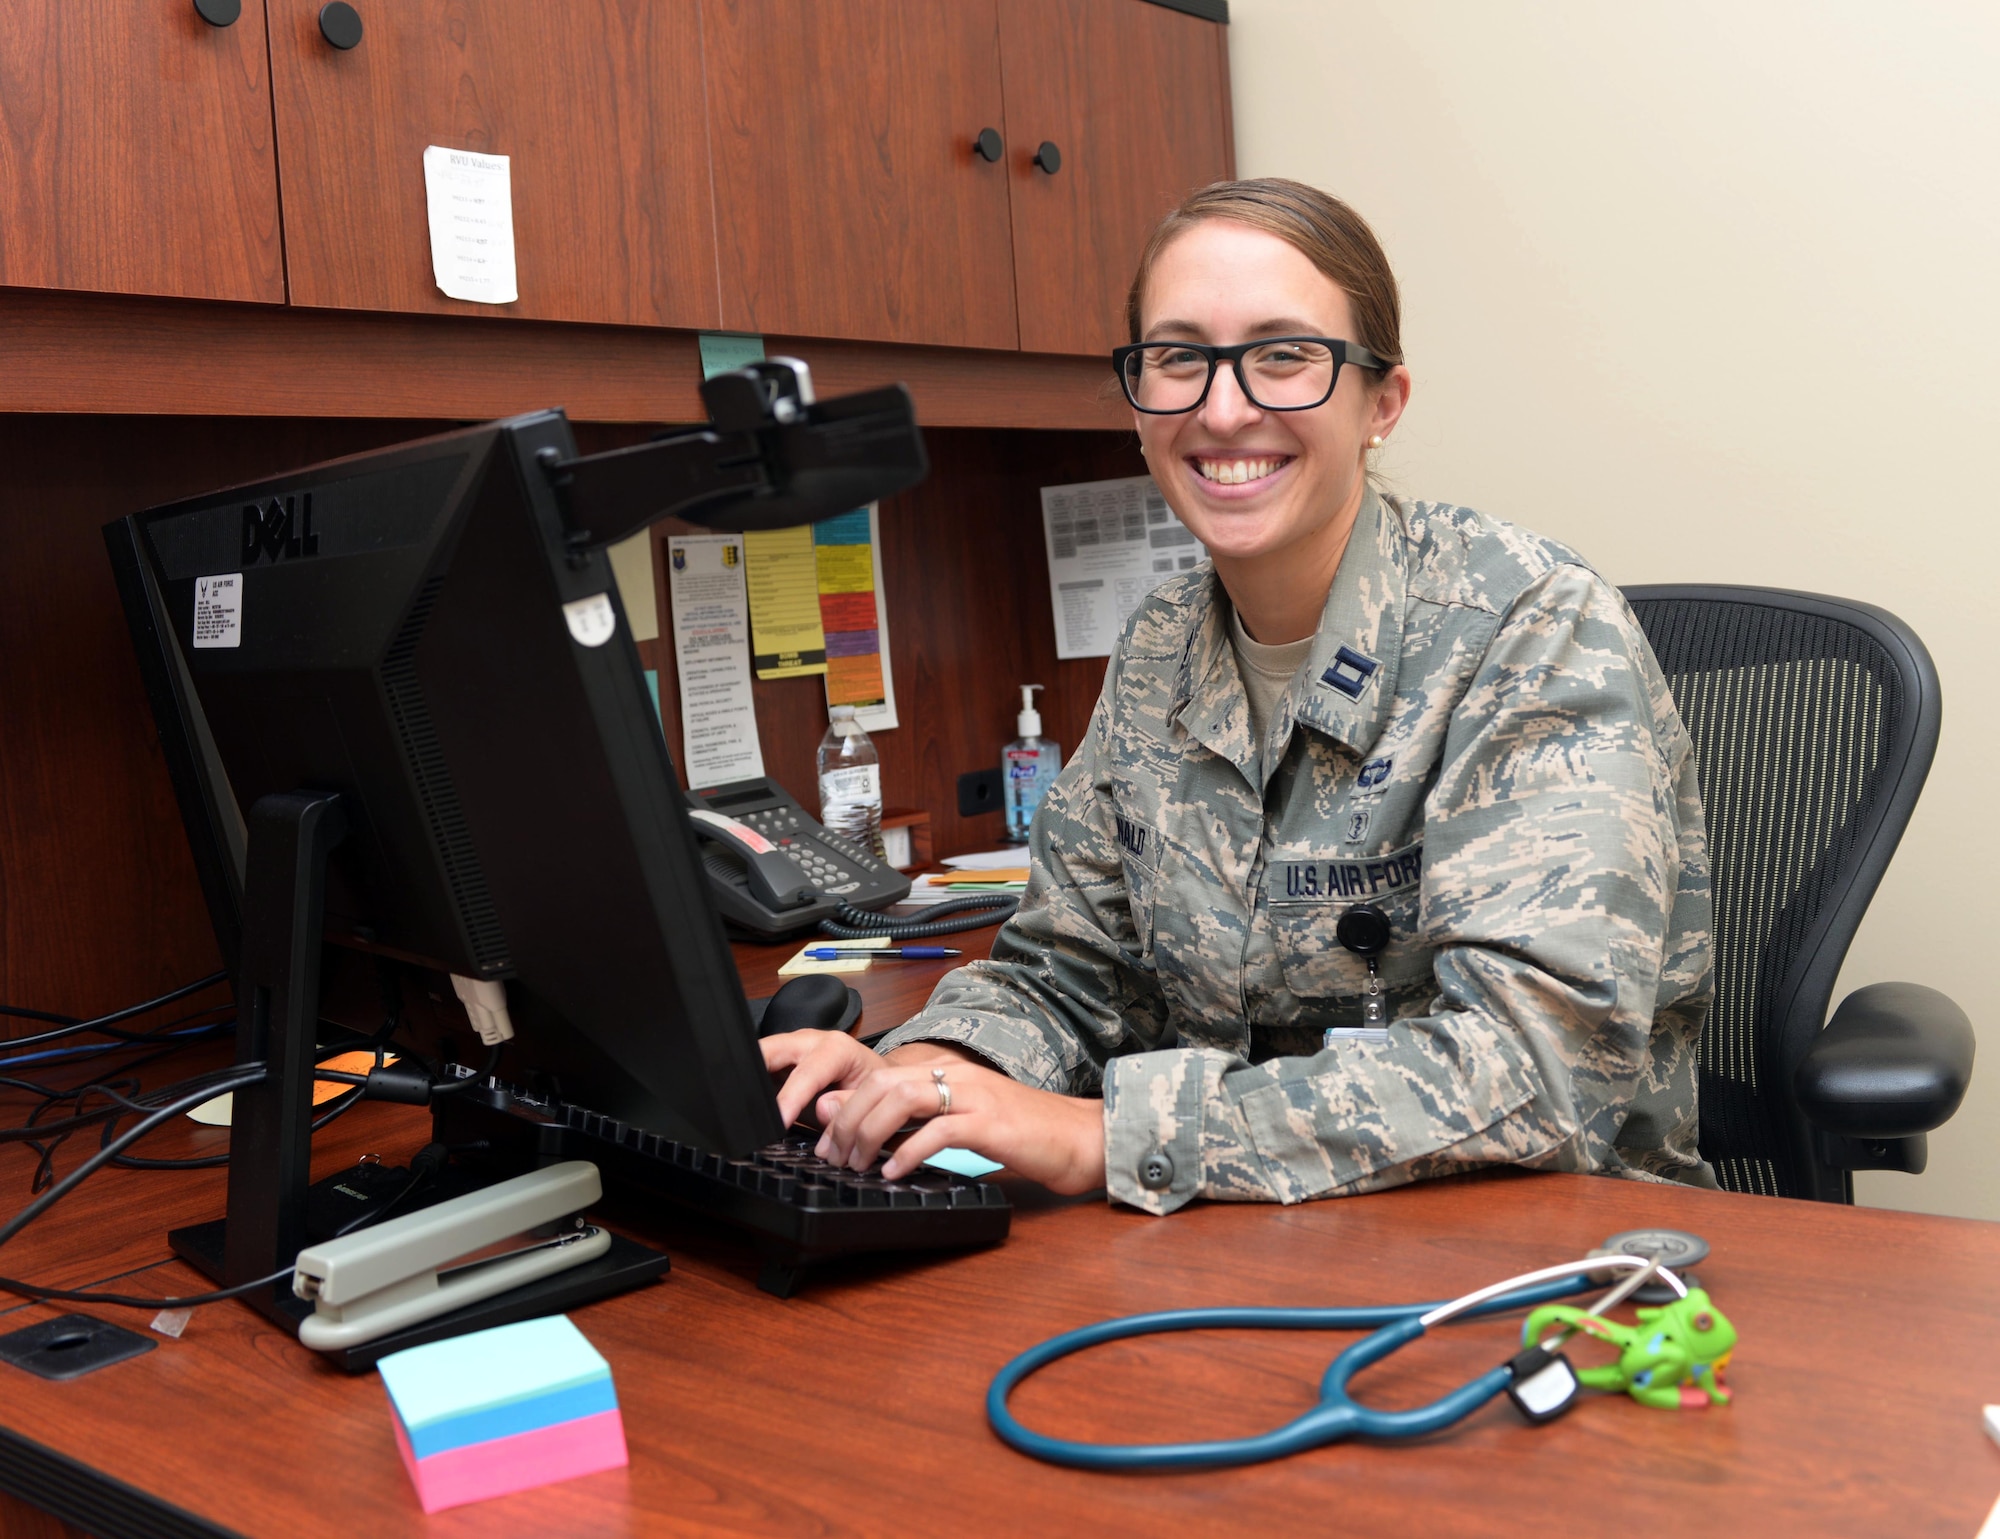 Capt. Megan McDonald, a pediatrician with the 28th Medical Group, recently arrived at Ellsworth Air Force Base, S.D., in late Aug. 2016. As a pediatrician, McDonald offers unique medical services, attending to the growth and development of the children of service members at Ellsworth. (U.S. Air Force photo by Airman 1st. Class Donald C. Knechtel)